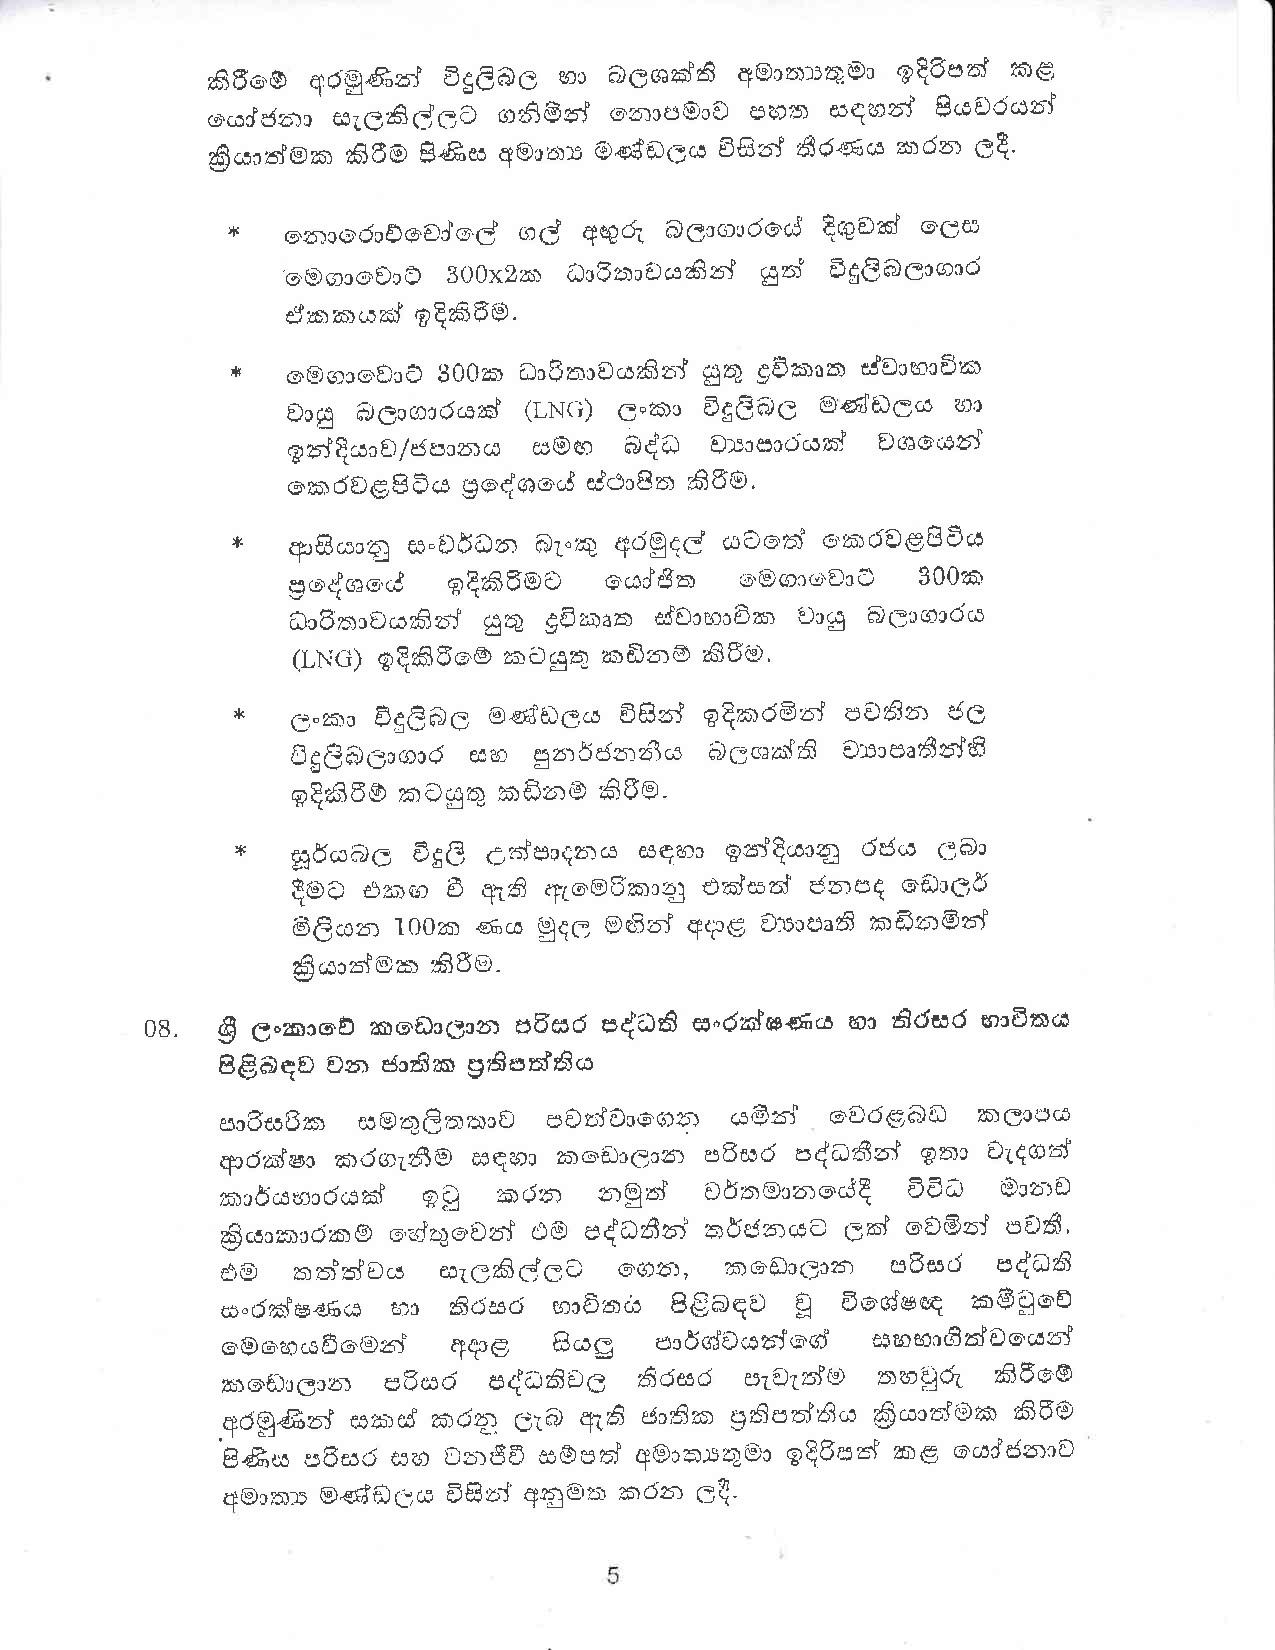 Cabinet Decision on 22.01.2020Full document page 005